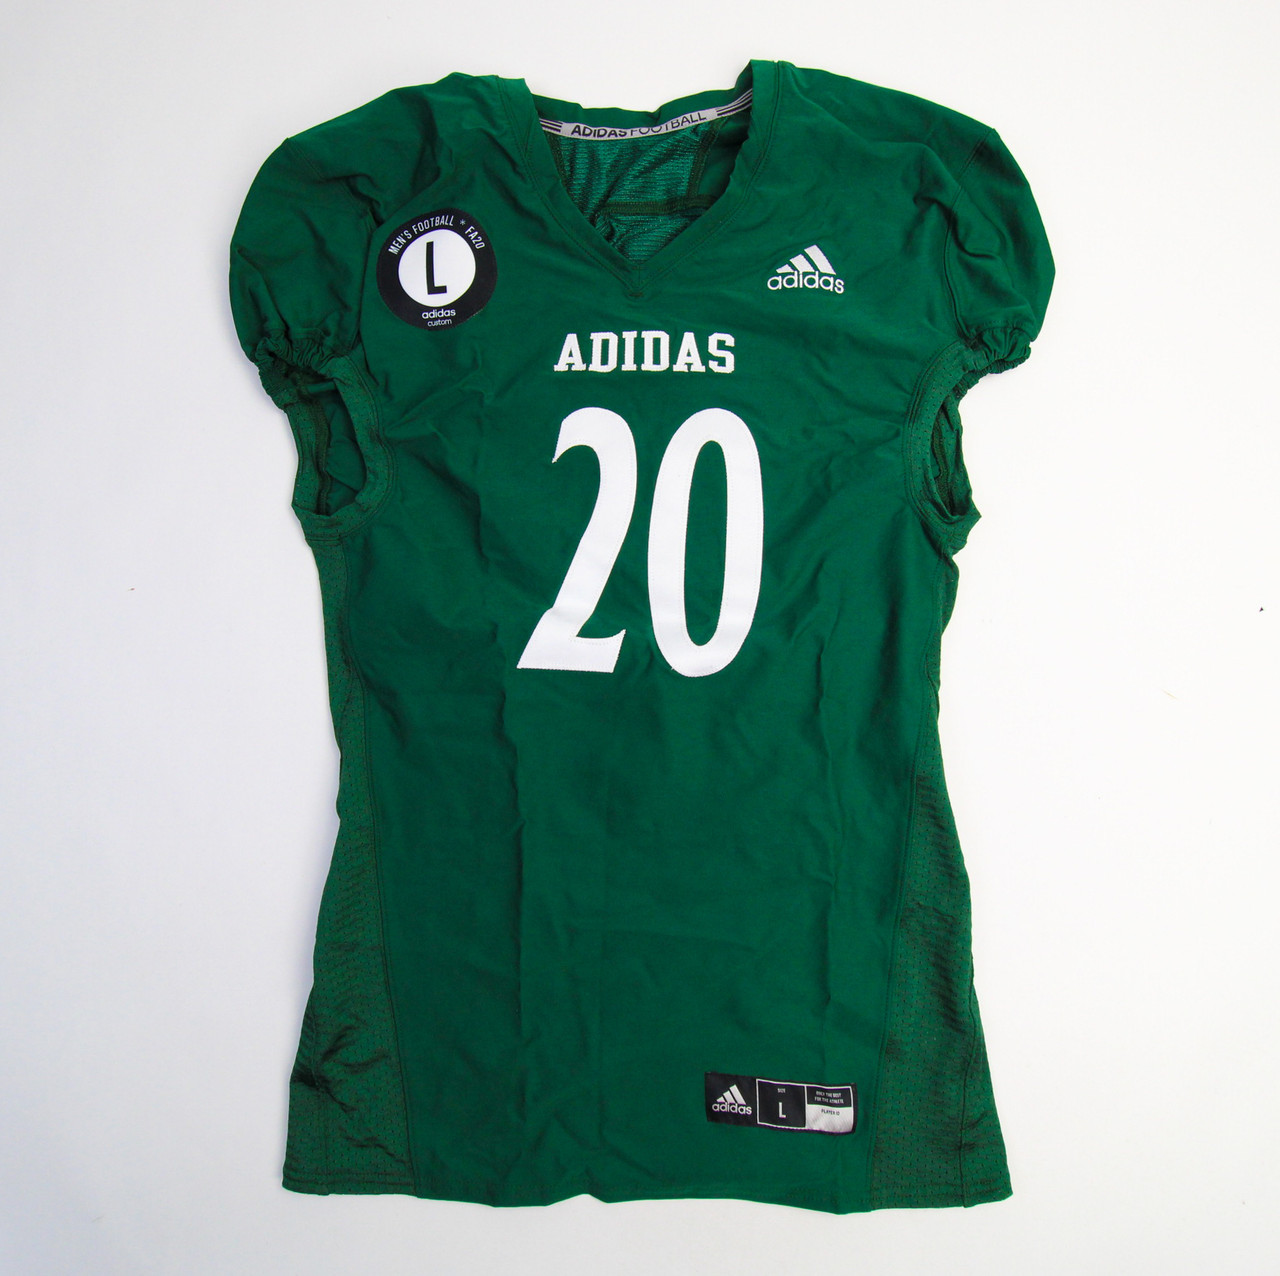 Game Jersey - Football